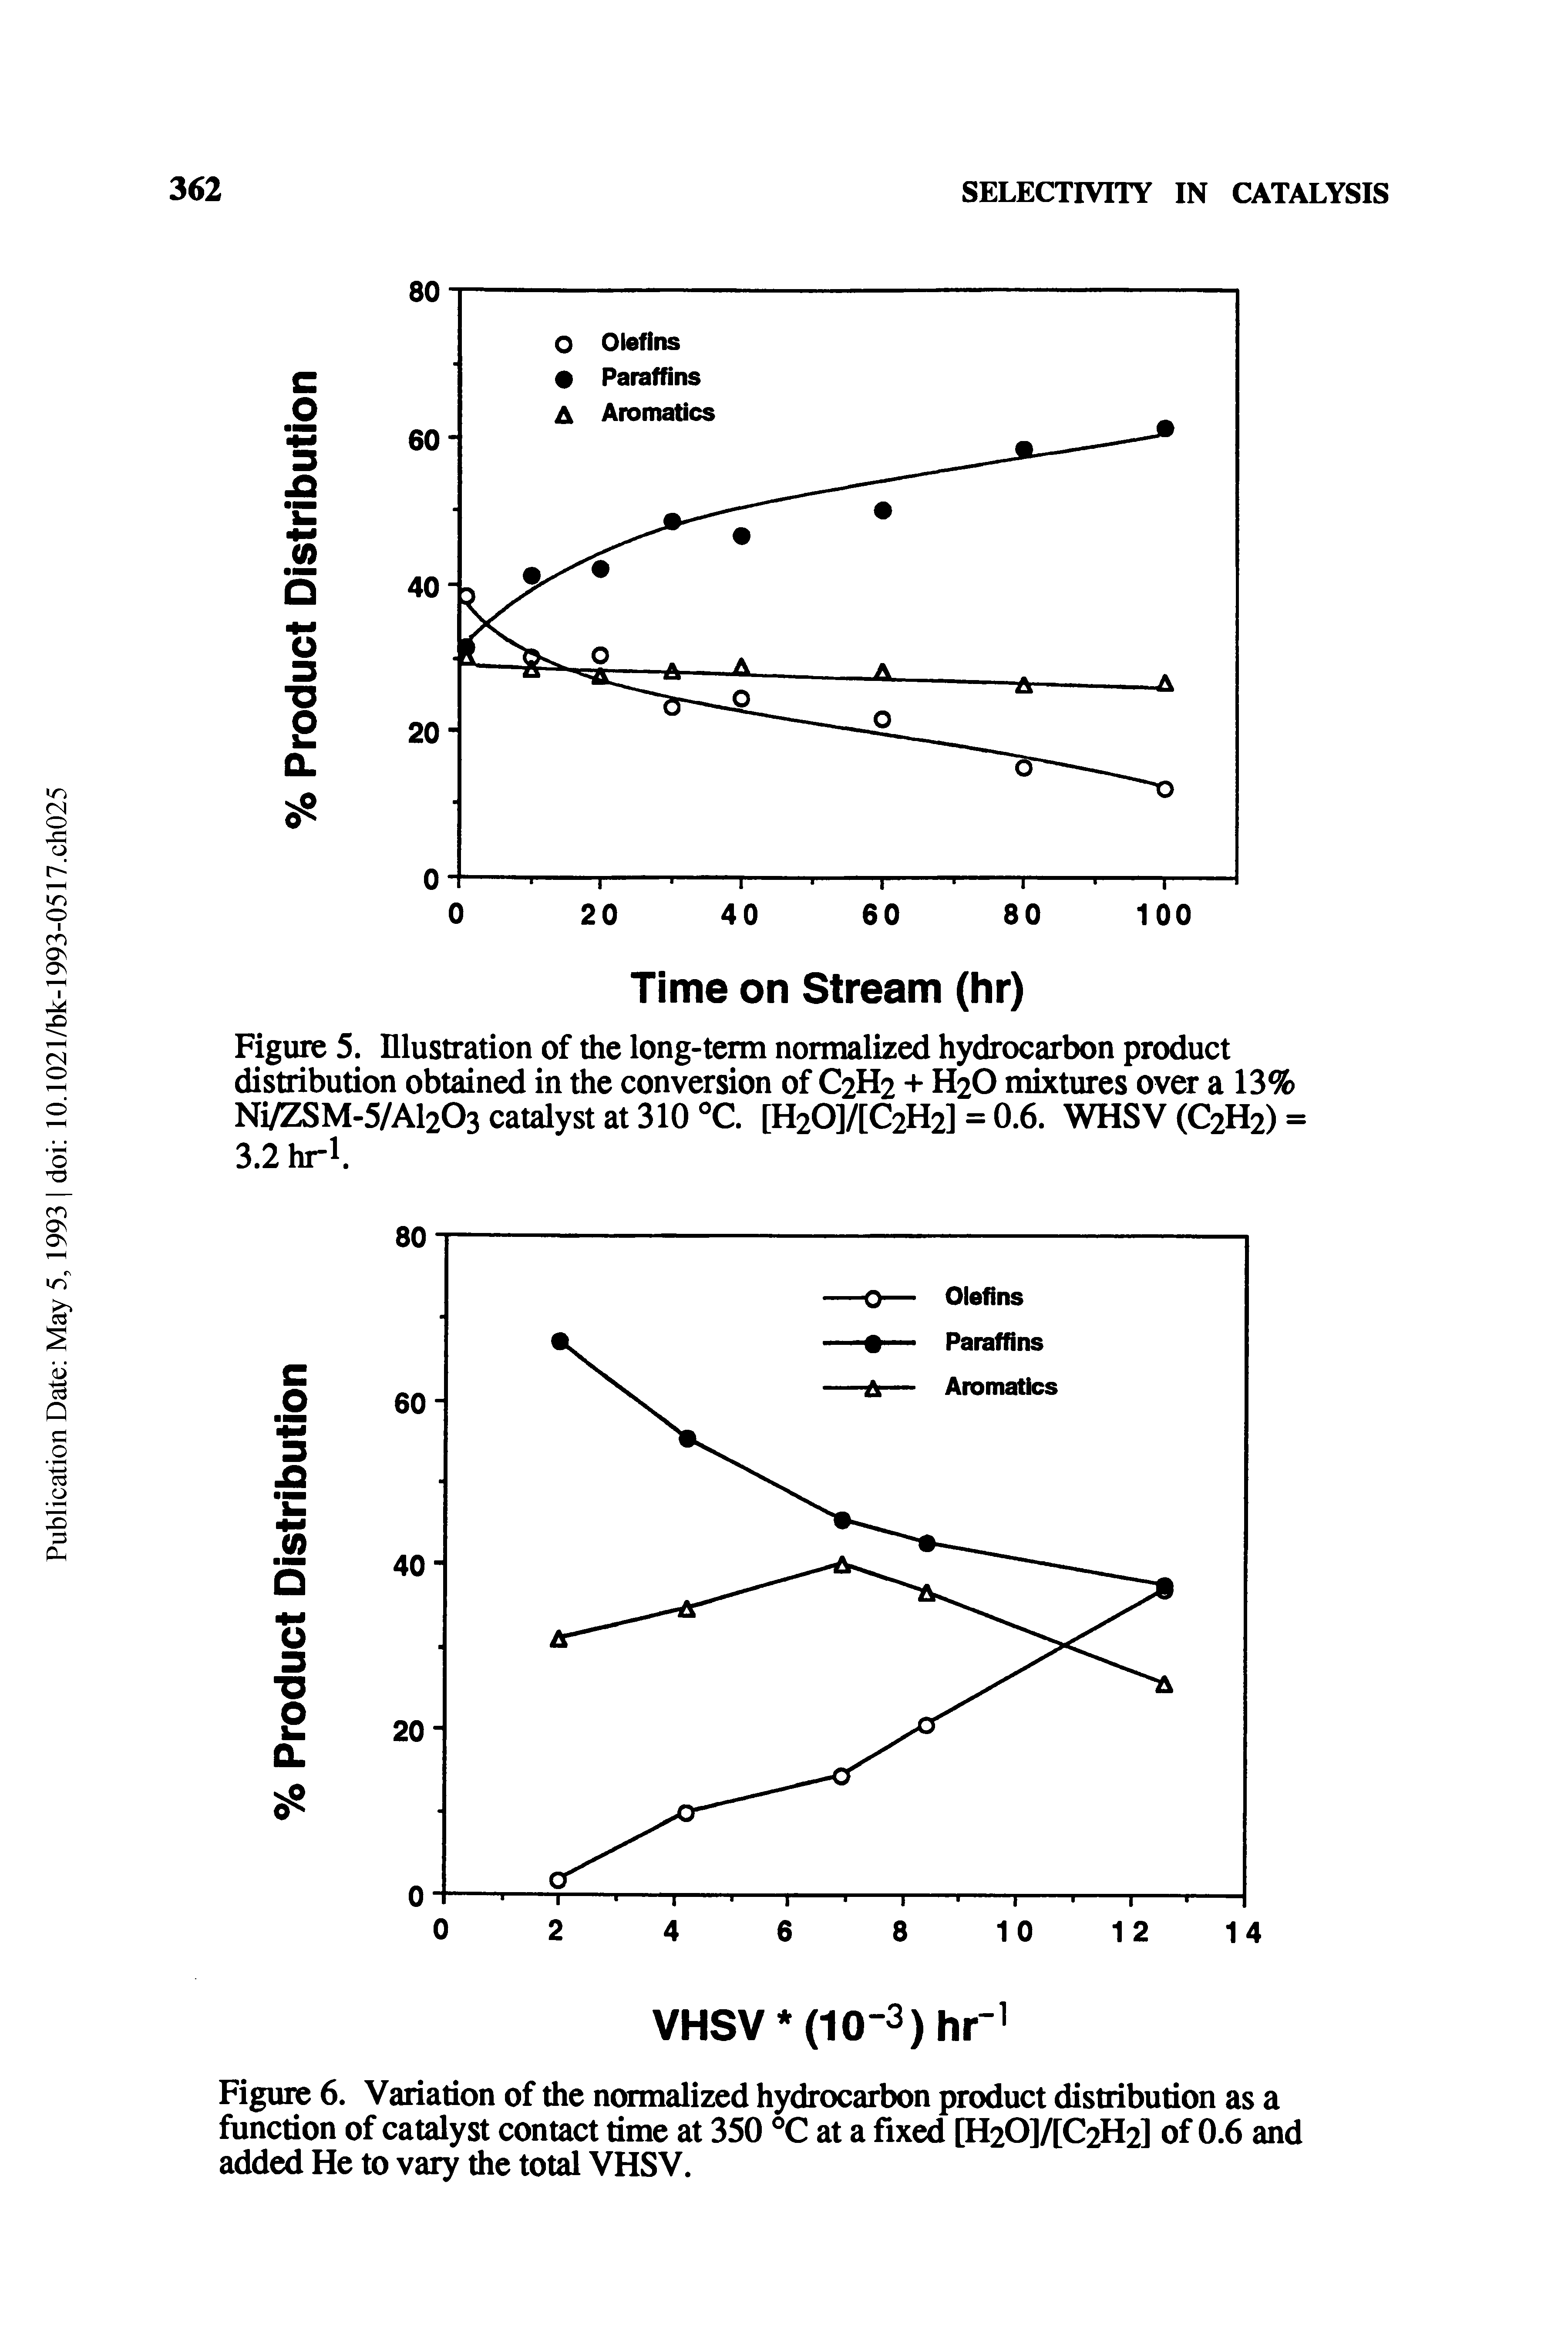 Figure 5. Illustration of the long-term normalized hydrocarbon product distribution obtained in the conversion of C2H2 + H2O mixtures over a 13% Ni/ZSM-5/Al203 catalyst at 310 °C. [H20]/[C2H2] = 0.6. WHSV(C2H2) = 3.2 hr1.